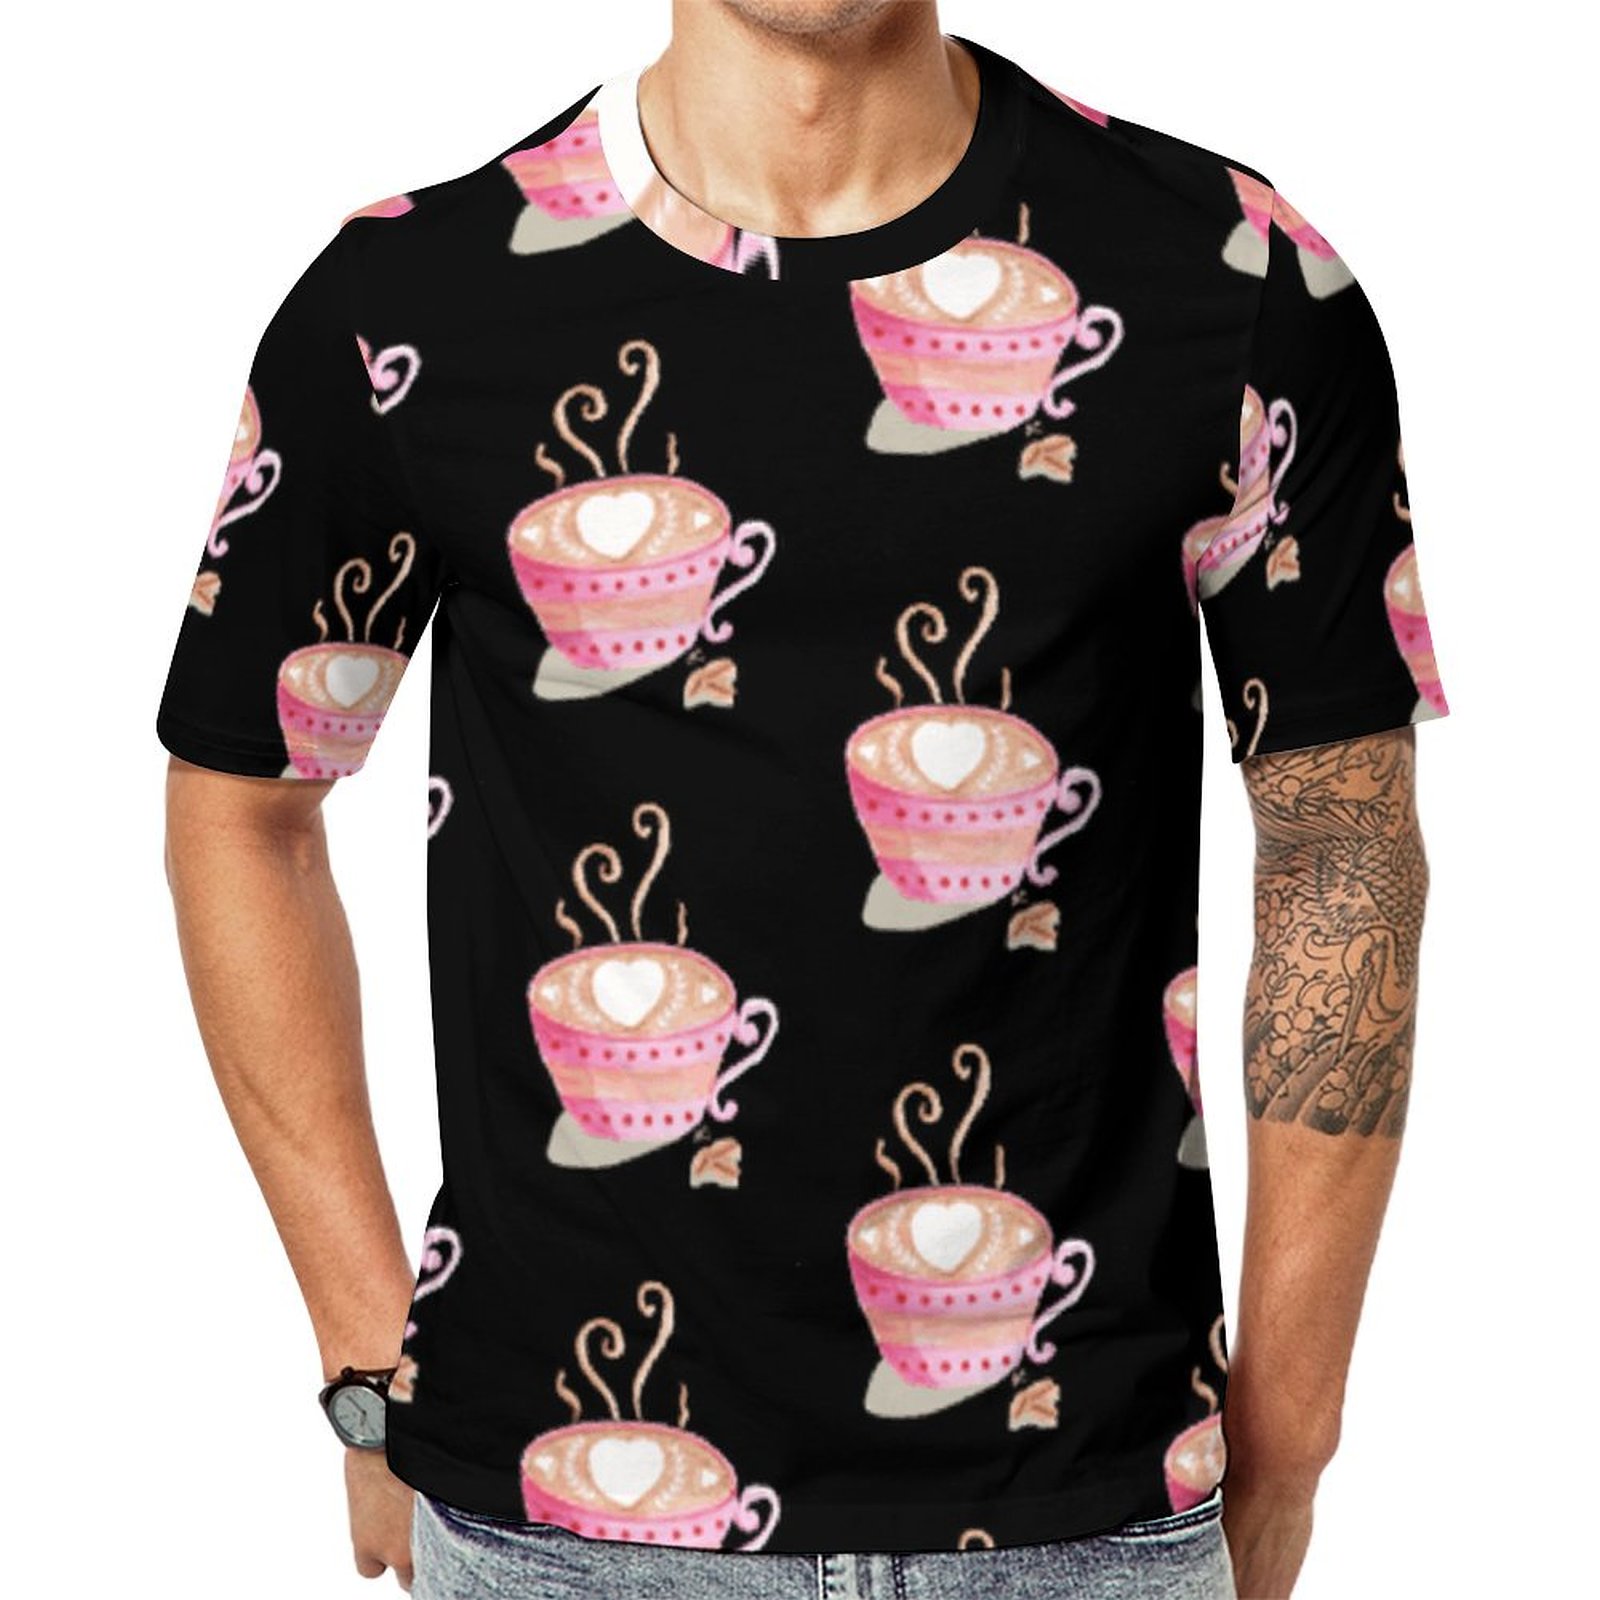 Pink Elegant Coffee Cup Short Sleeve Print Unisex Tshirt Summer Casual Tees for Men and Women Coolcoshirts